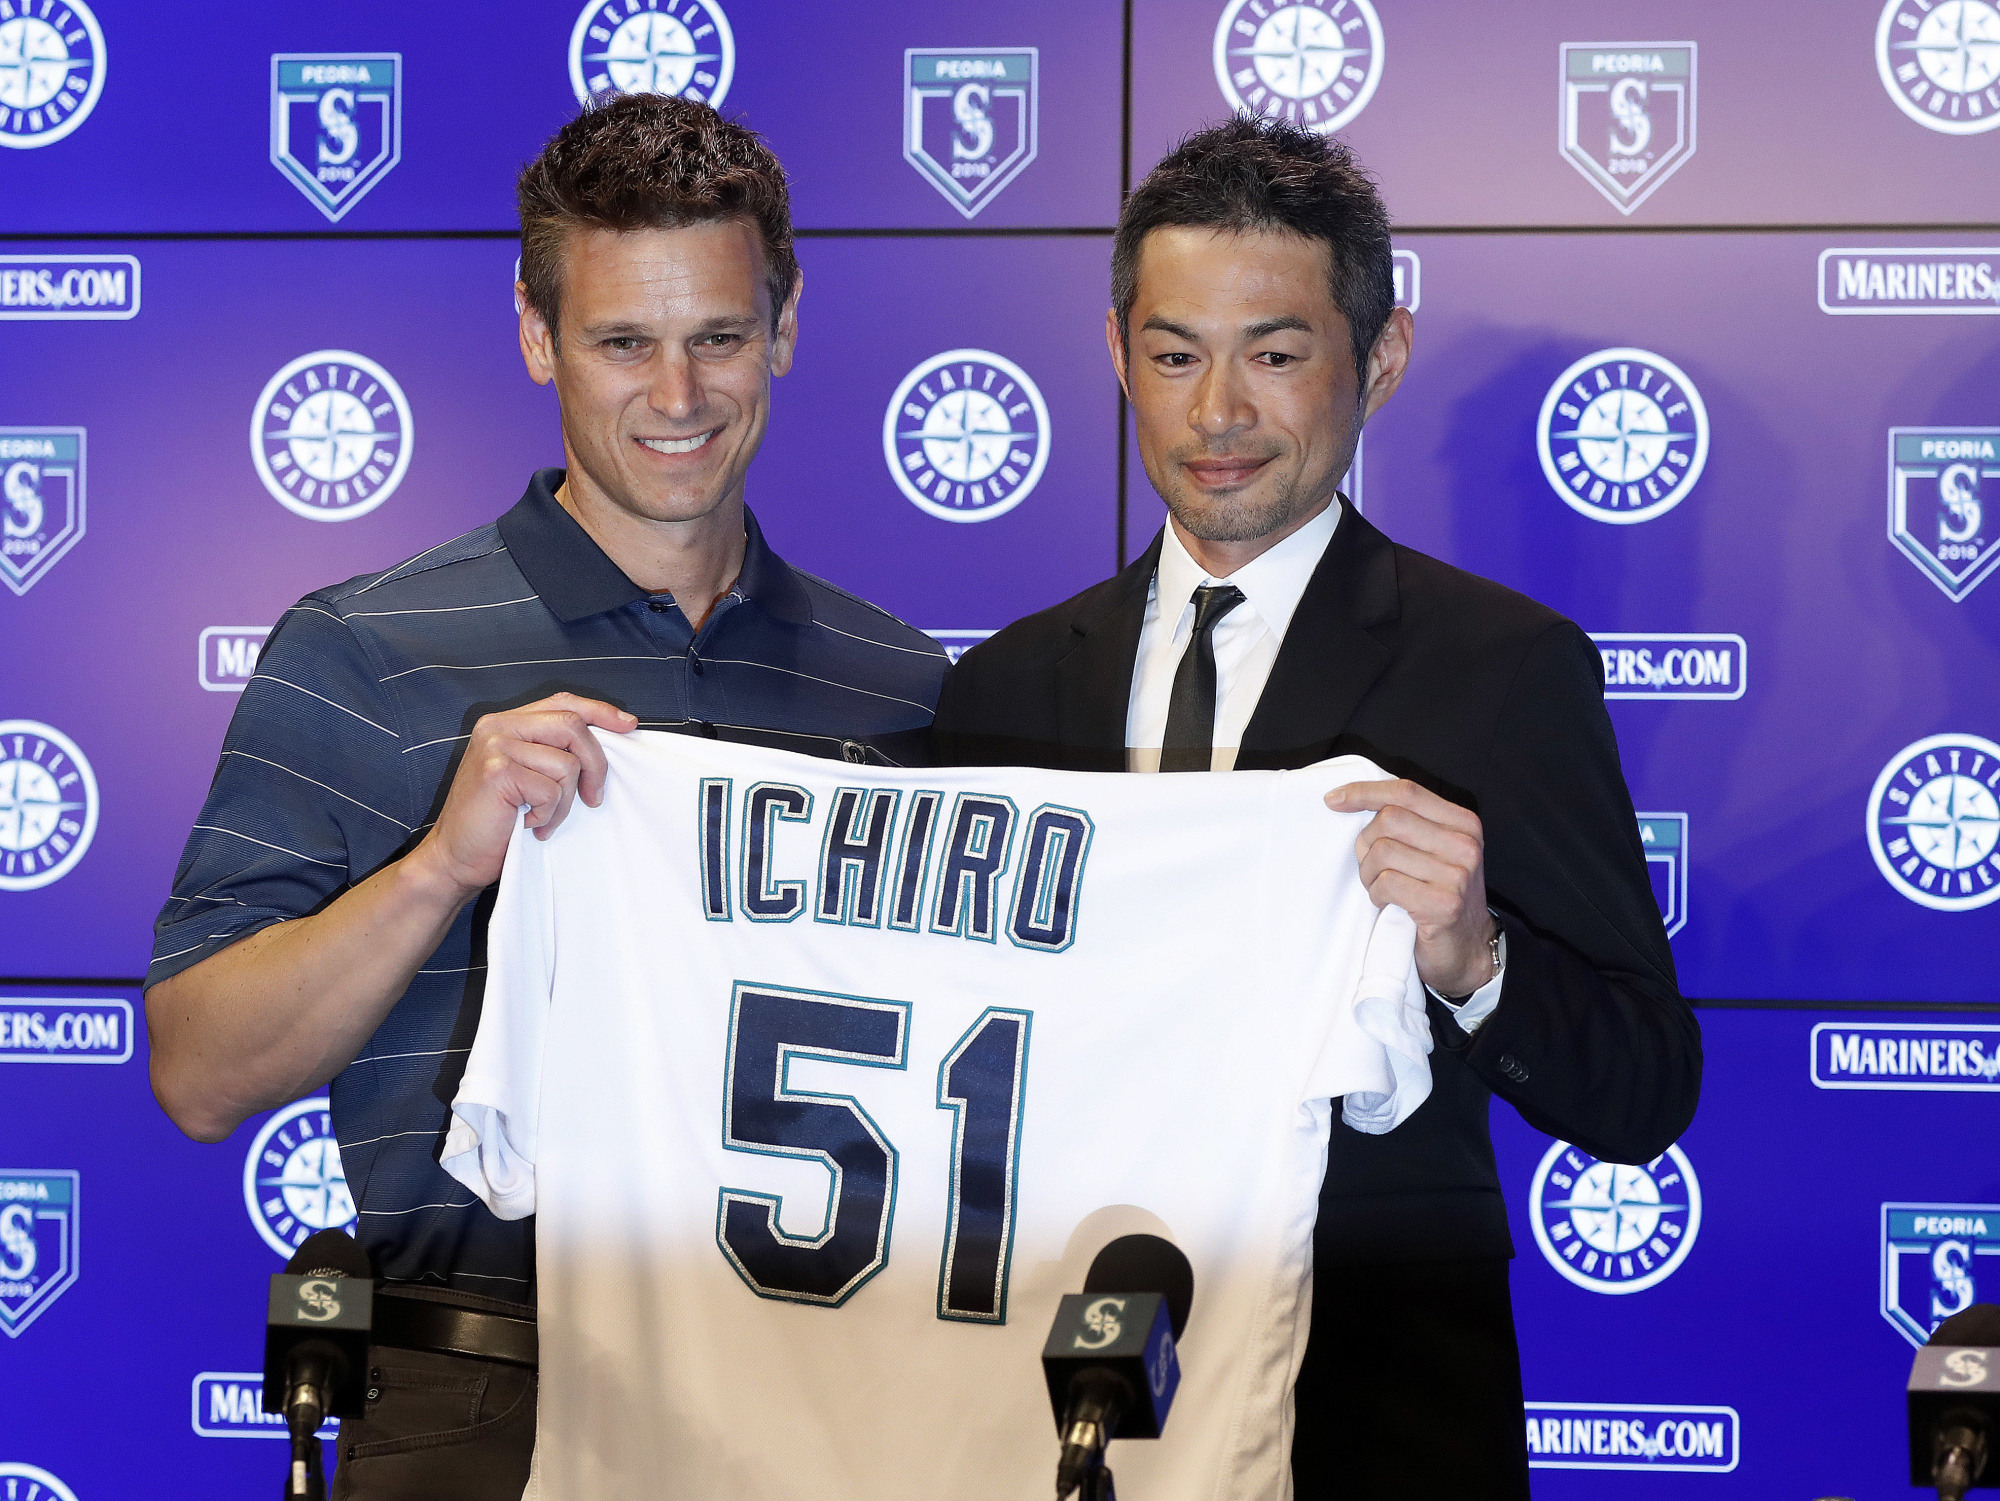 Ichiro Suzuki stands next to Seattle Mariners general manager Jerry Dipoto during a news conference in Peoria, Arizona, on Wednesday after signing a one-year contract with the team. | AP